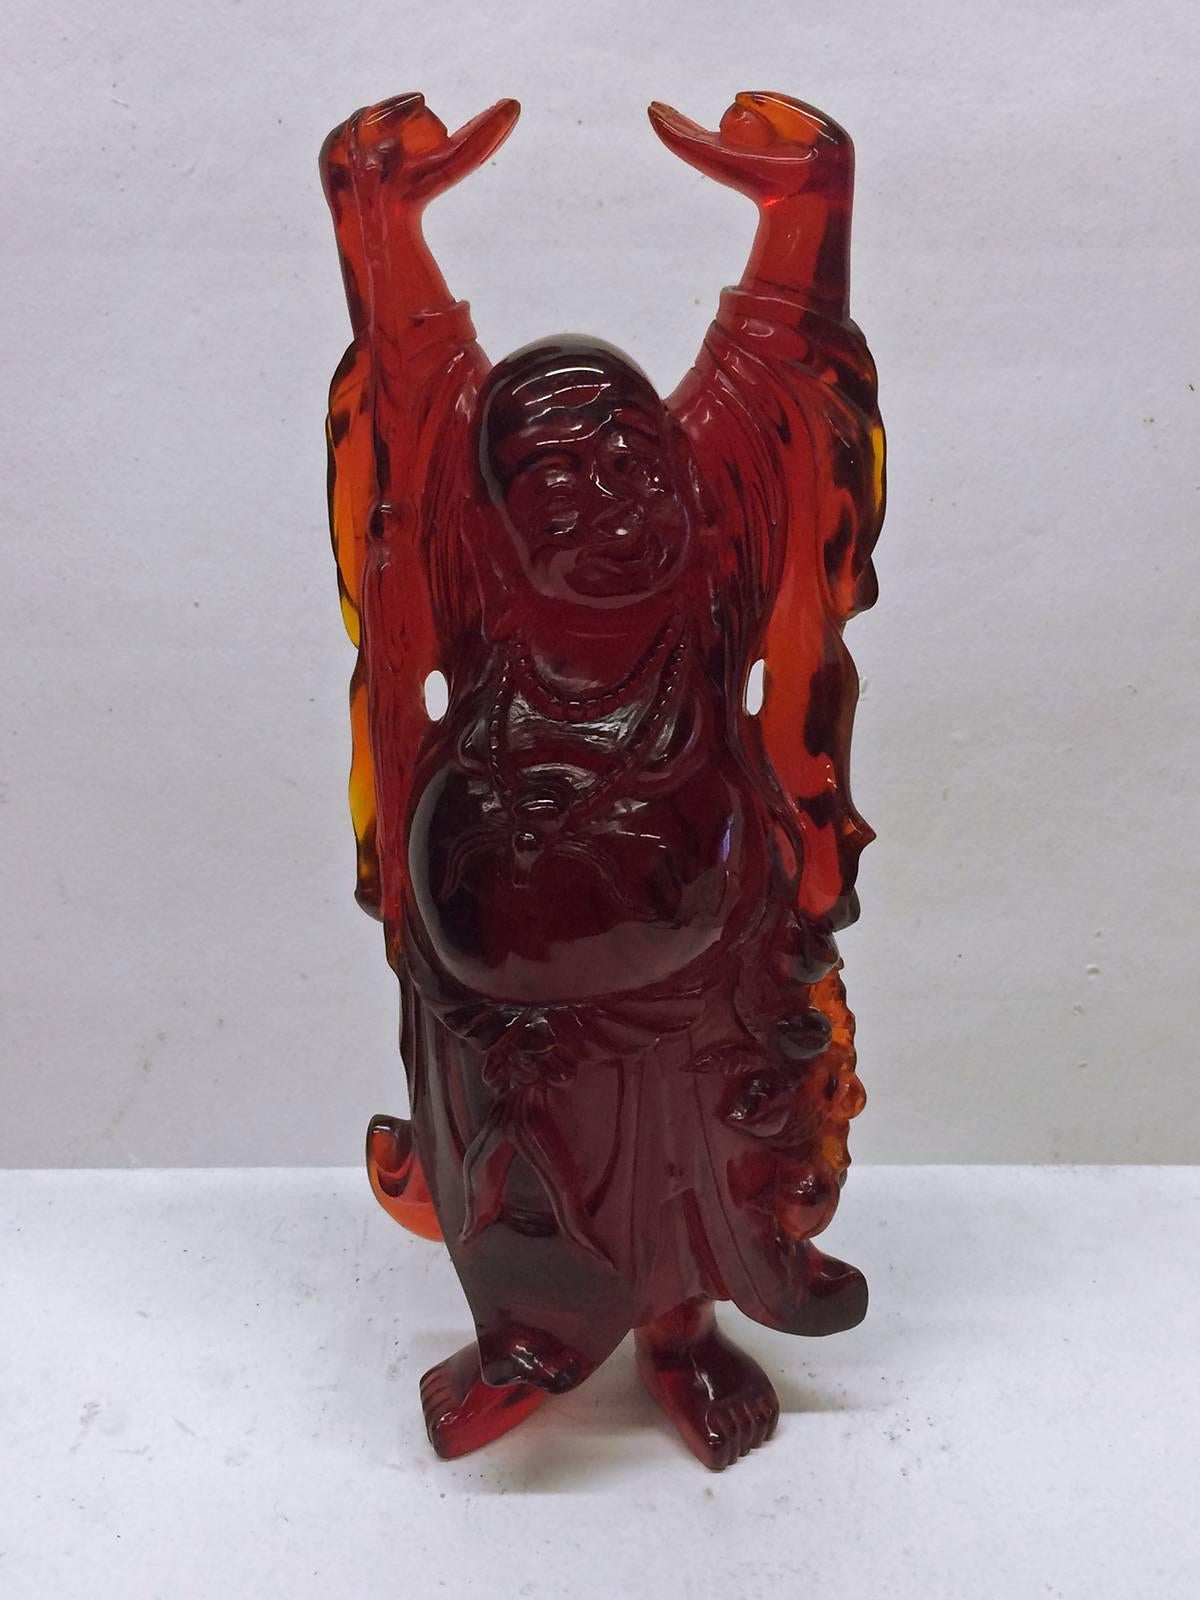 Cast resin sculpture of the Buddha.  Jolly, playful and light feeling in the transparent red resin of this very special Buddha.   
It sits on a lucite base  